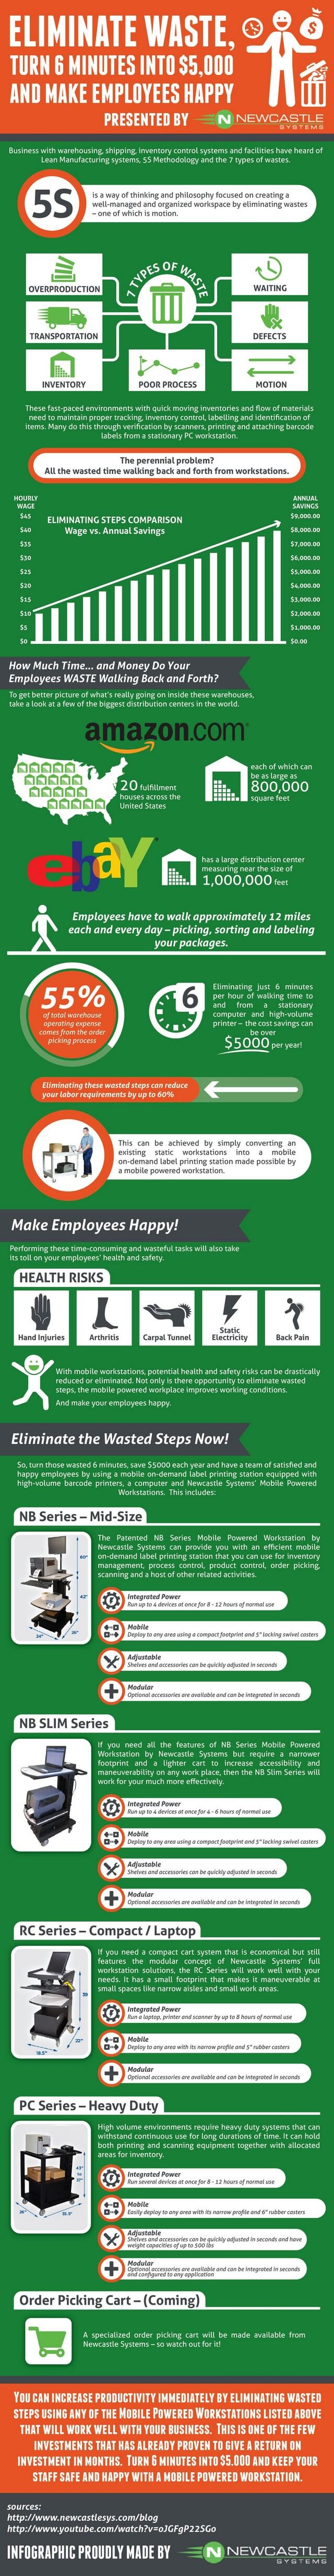 Eliminate waste Turn 6 Minutes into $5000 and Make Employees Happy